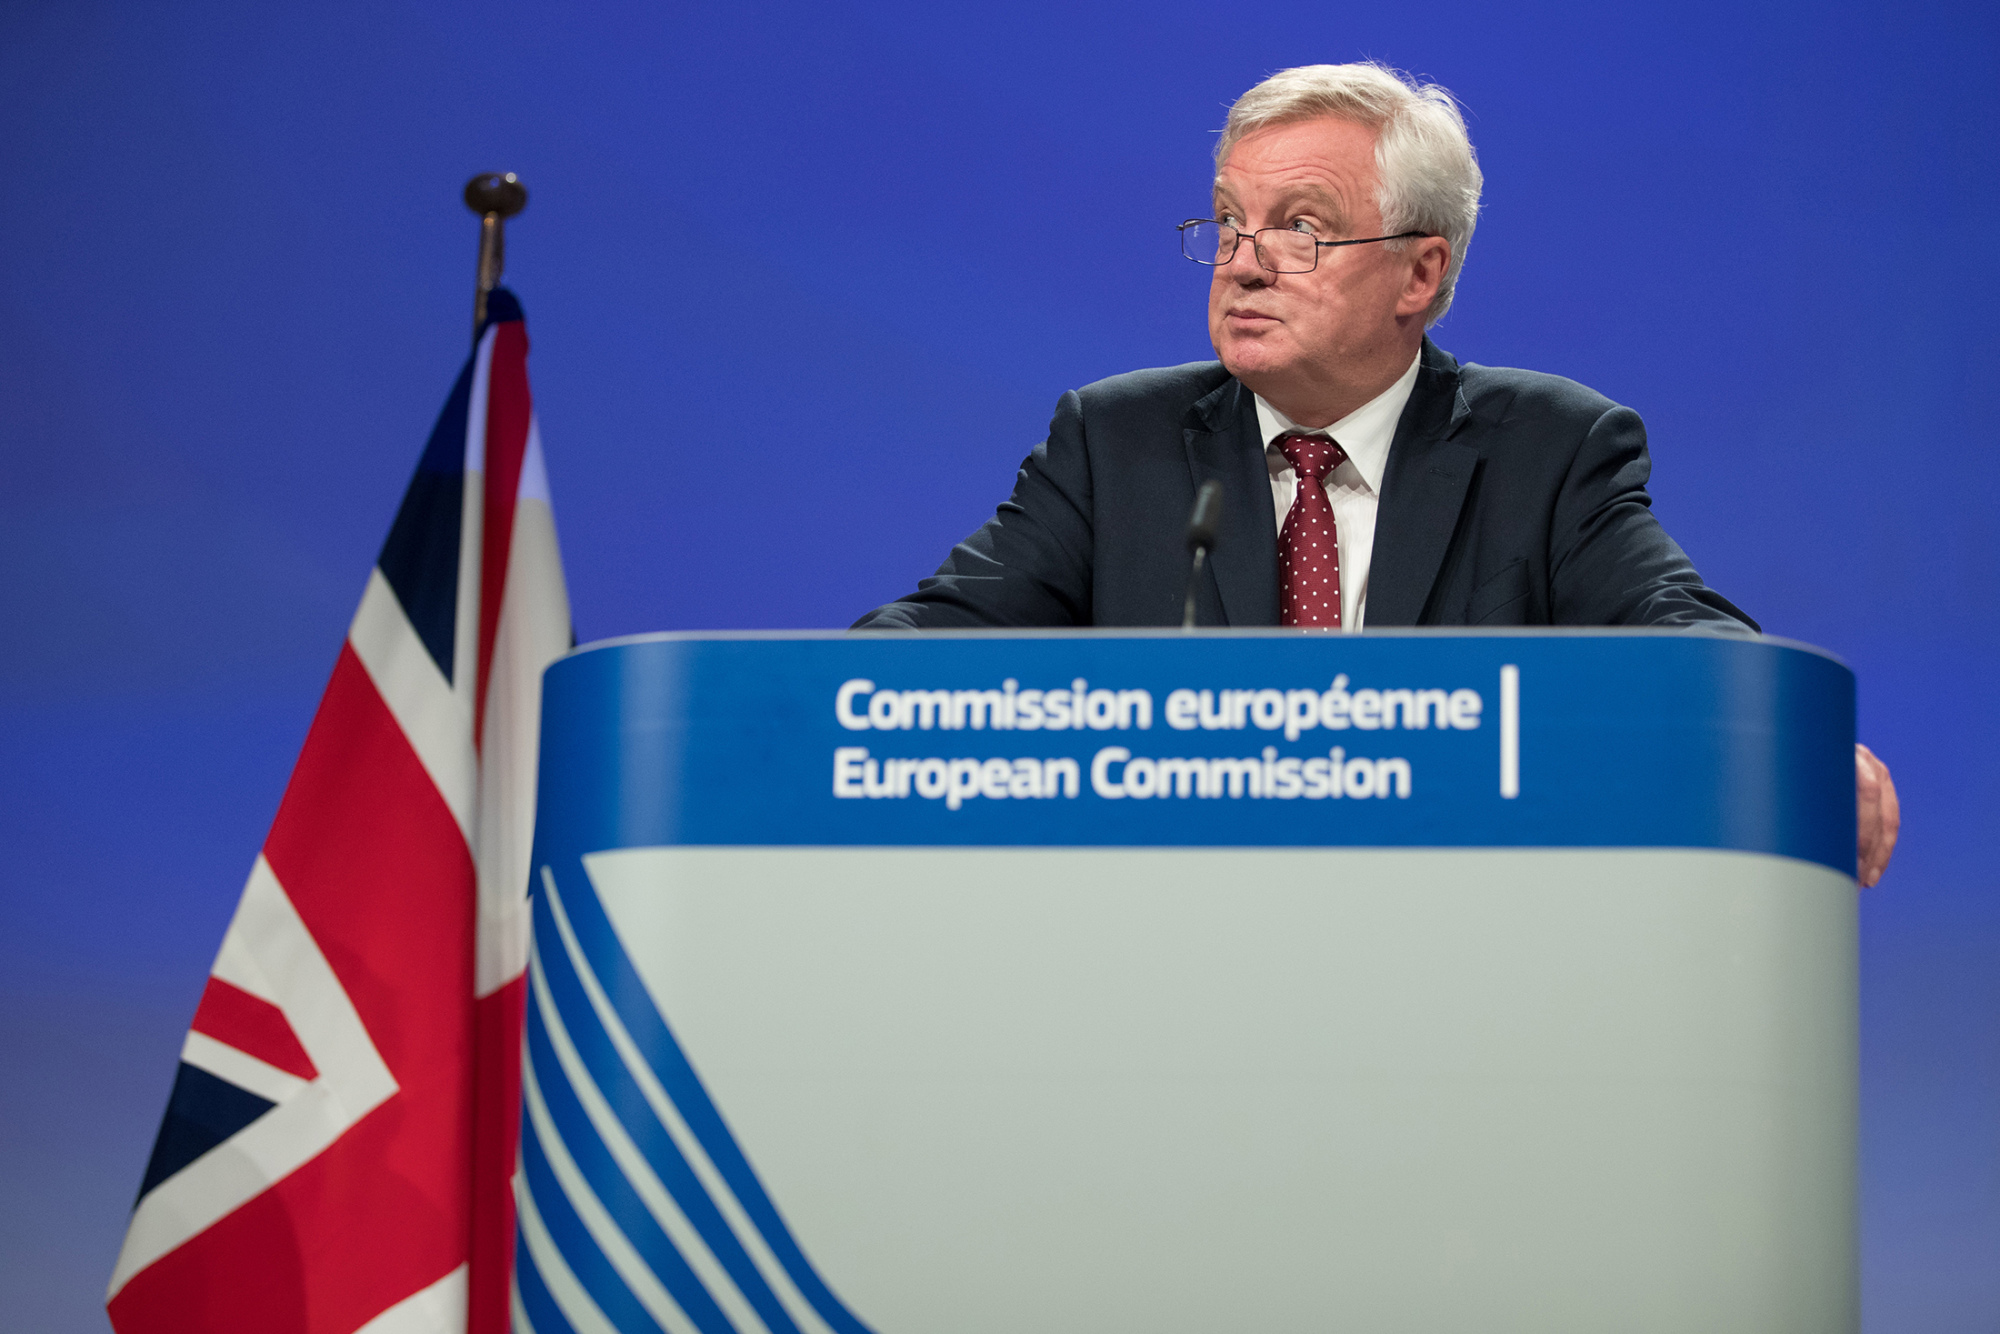 David Davis speaks during a news conference following the second round of Brexit negotiations in Brussels, Belgium, on July 20, 2017.
